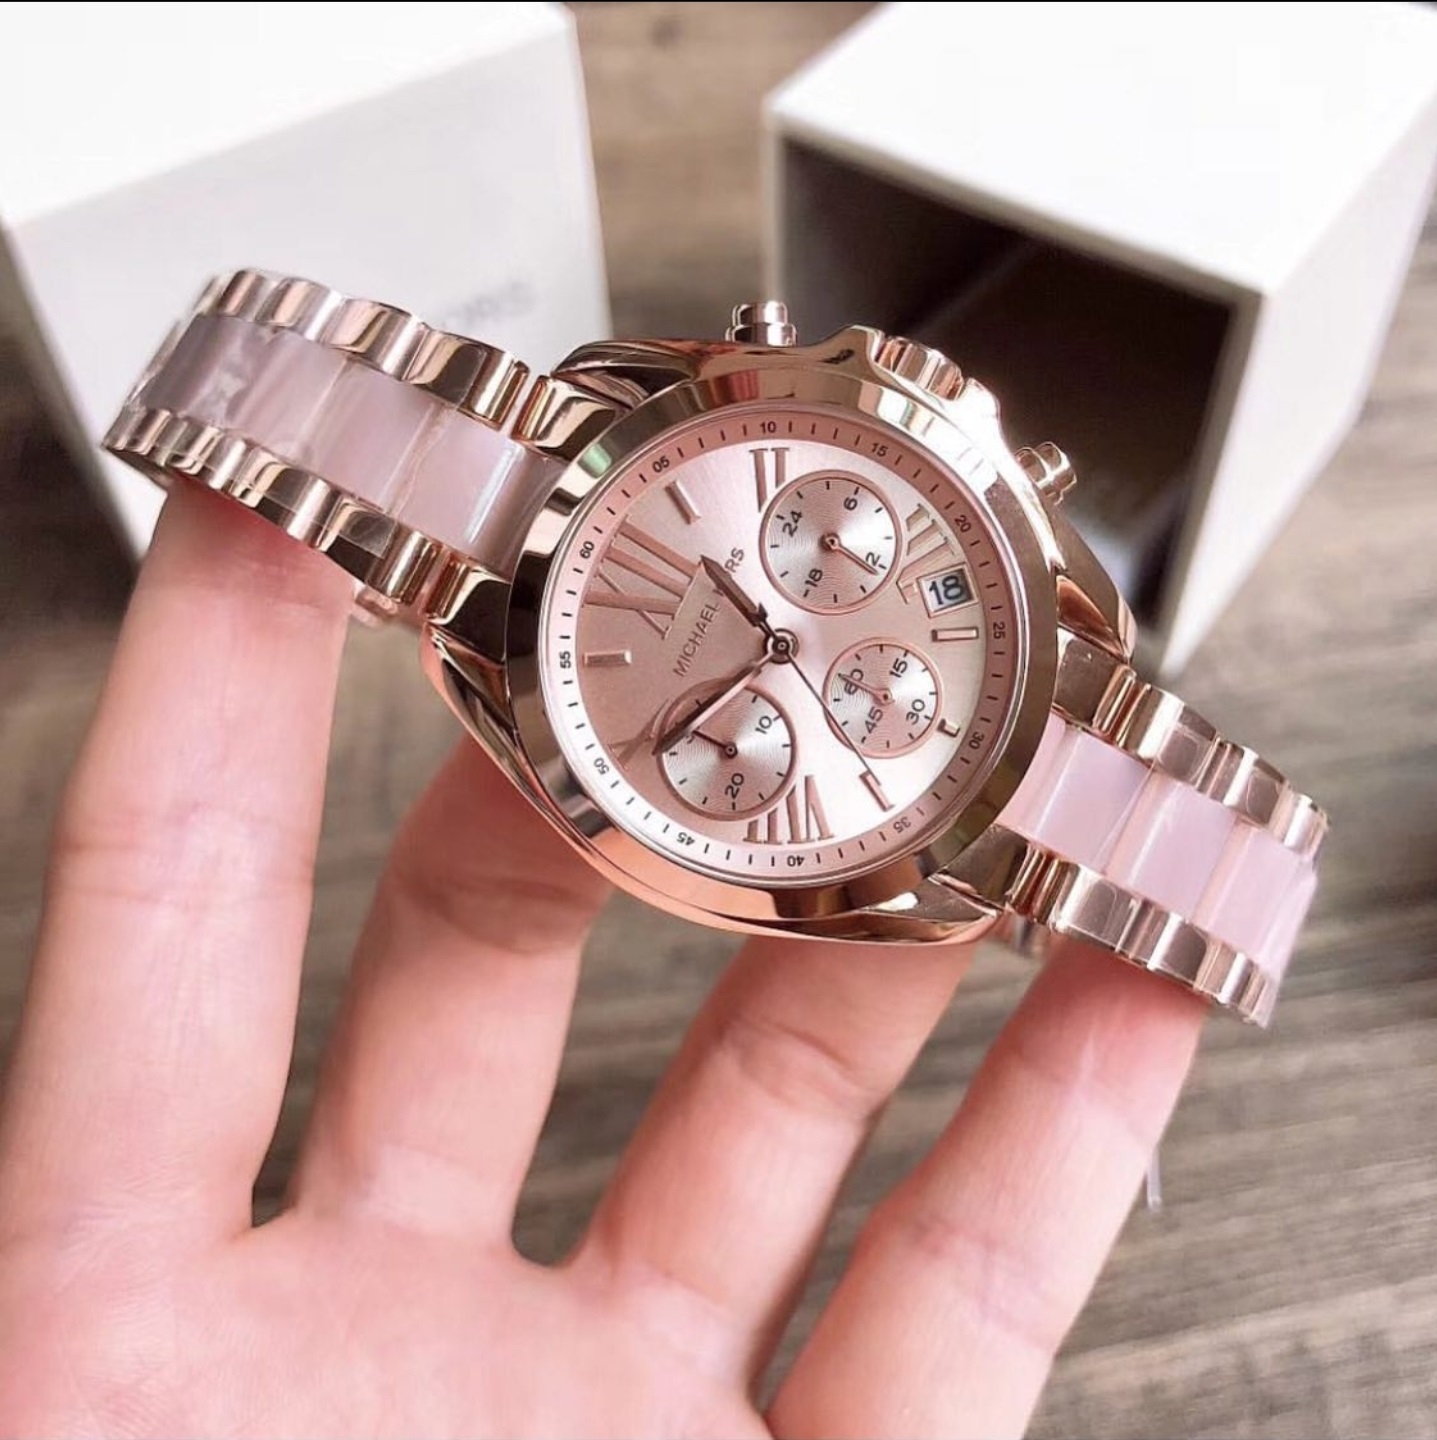 MICHAEL KORS MINI BRADSHAW ROSEGOLD STAINLESS STEEL 36MM CHRONOGRAPH WATCH   Curate